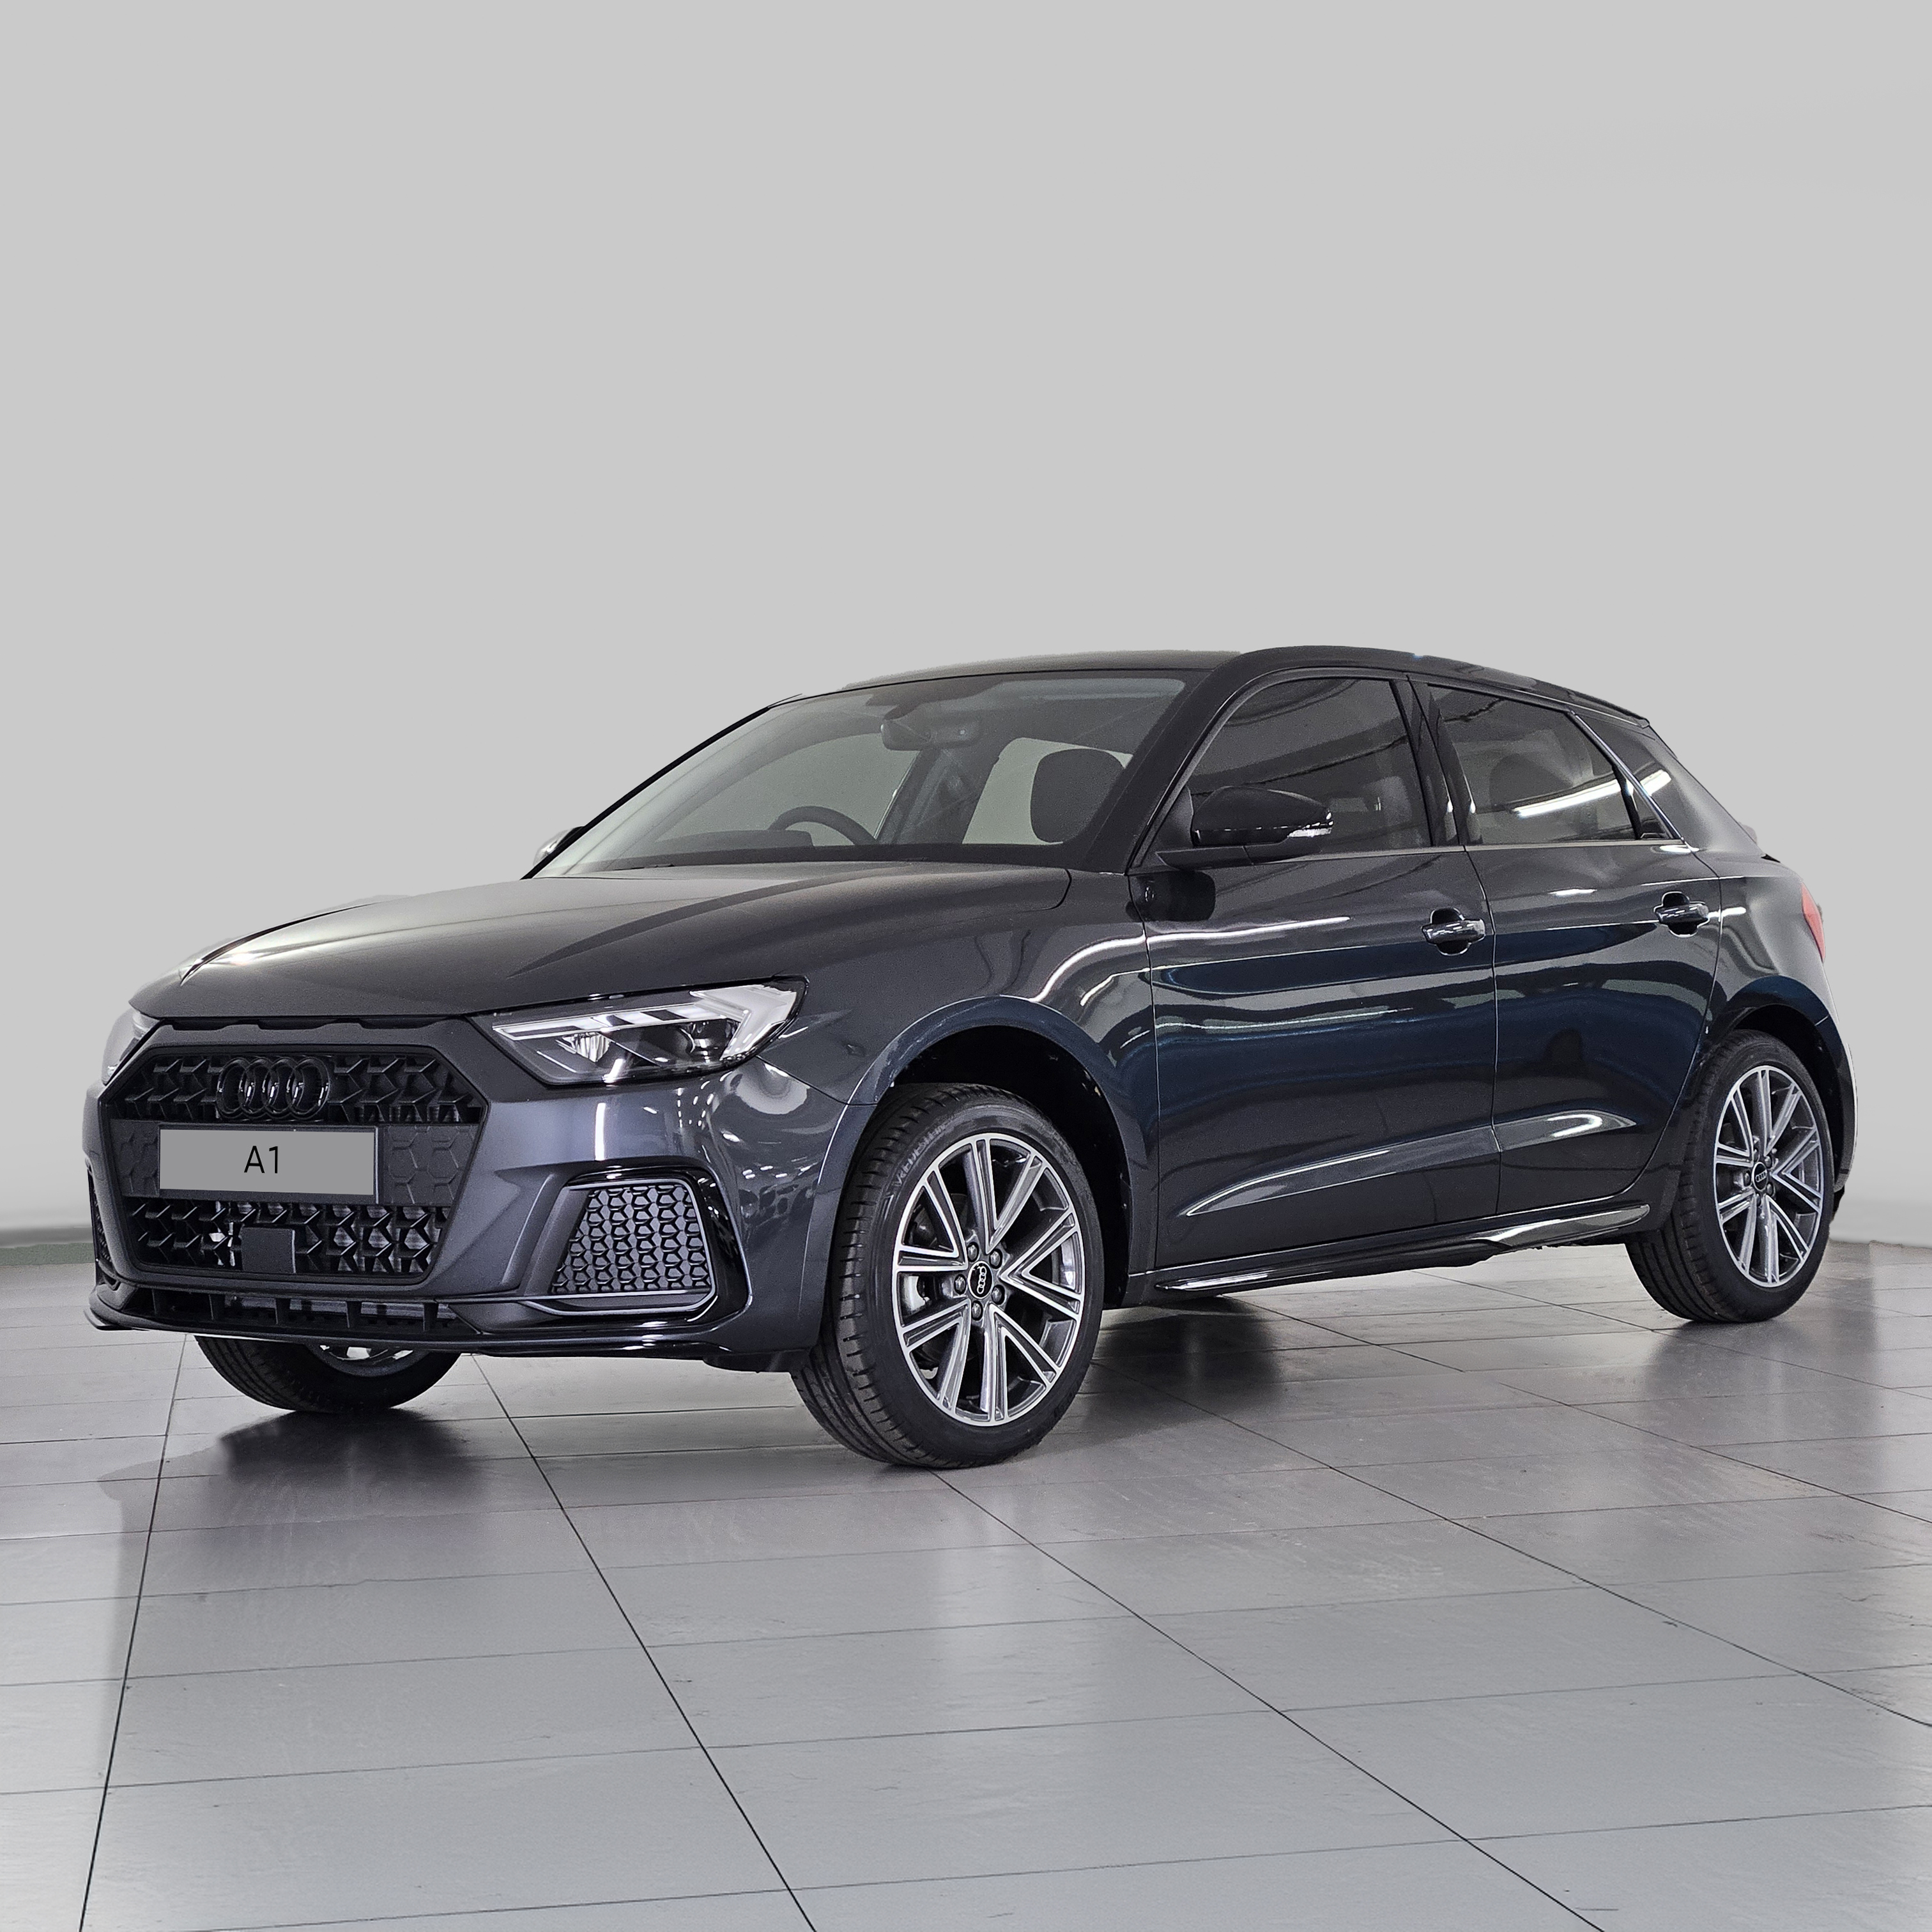 2024 Audi A1  for sale - 308913/